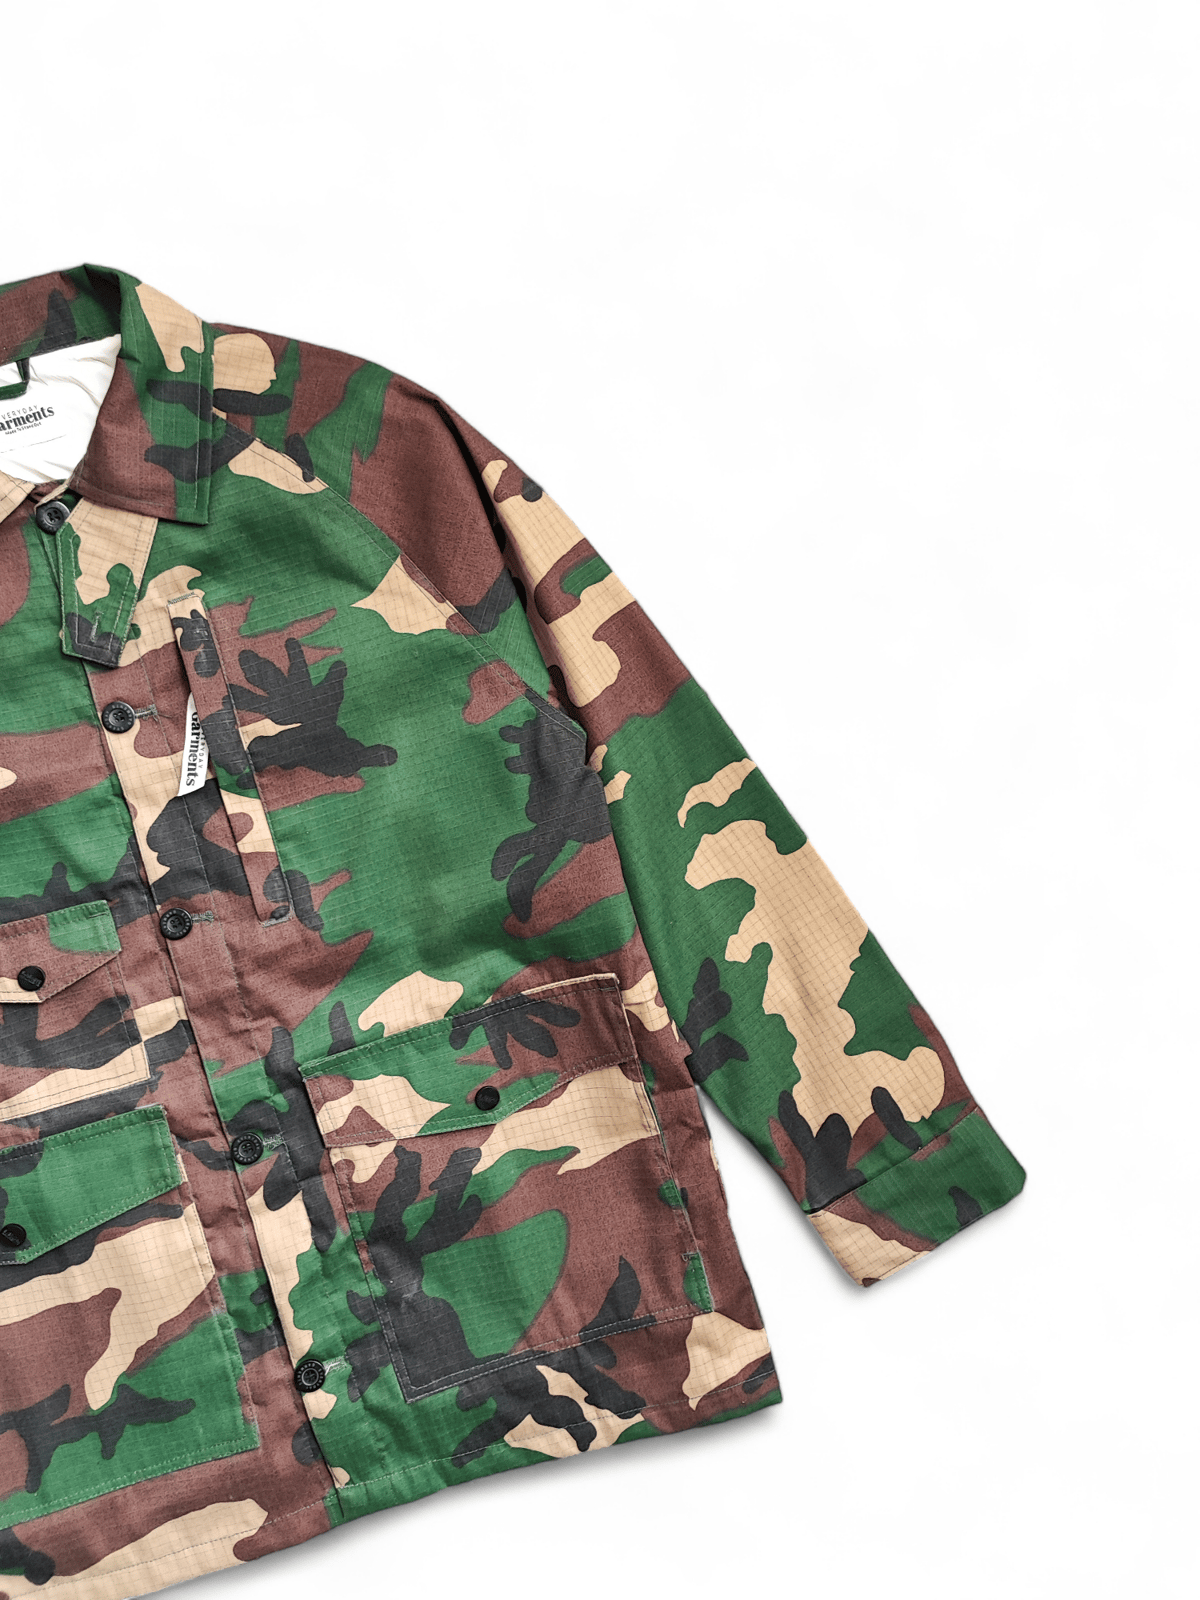 Image of "Sydney" Camo Ripstop Coveralls 